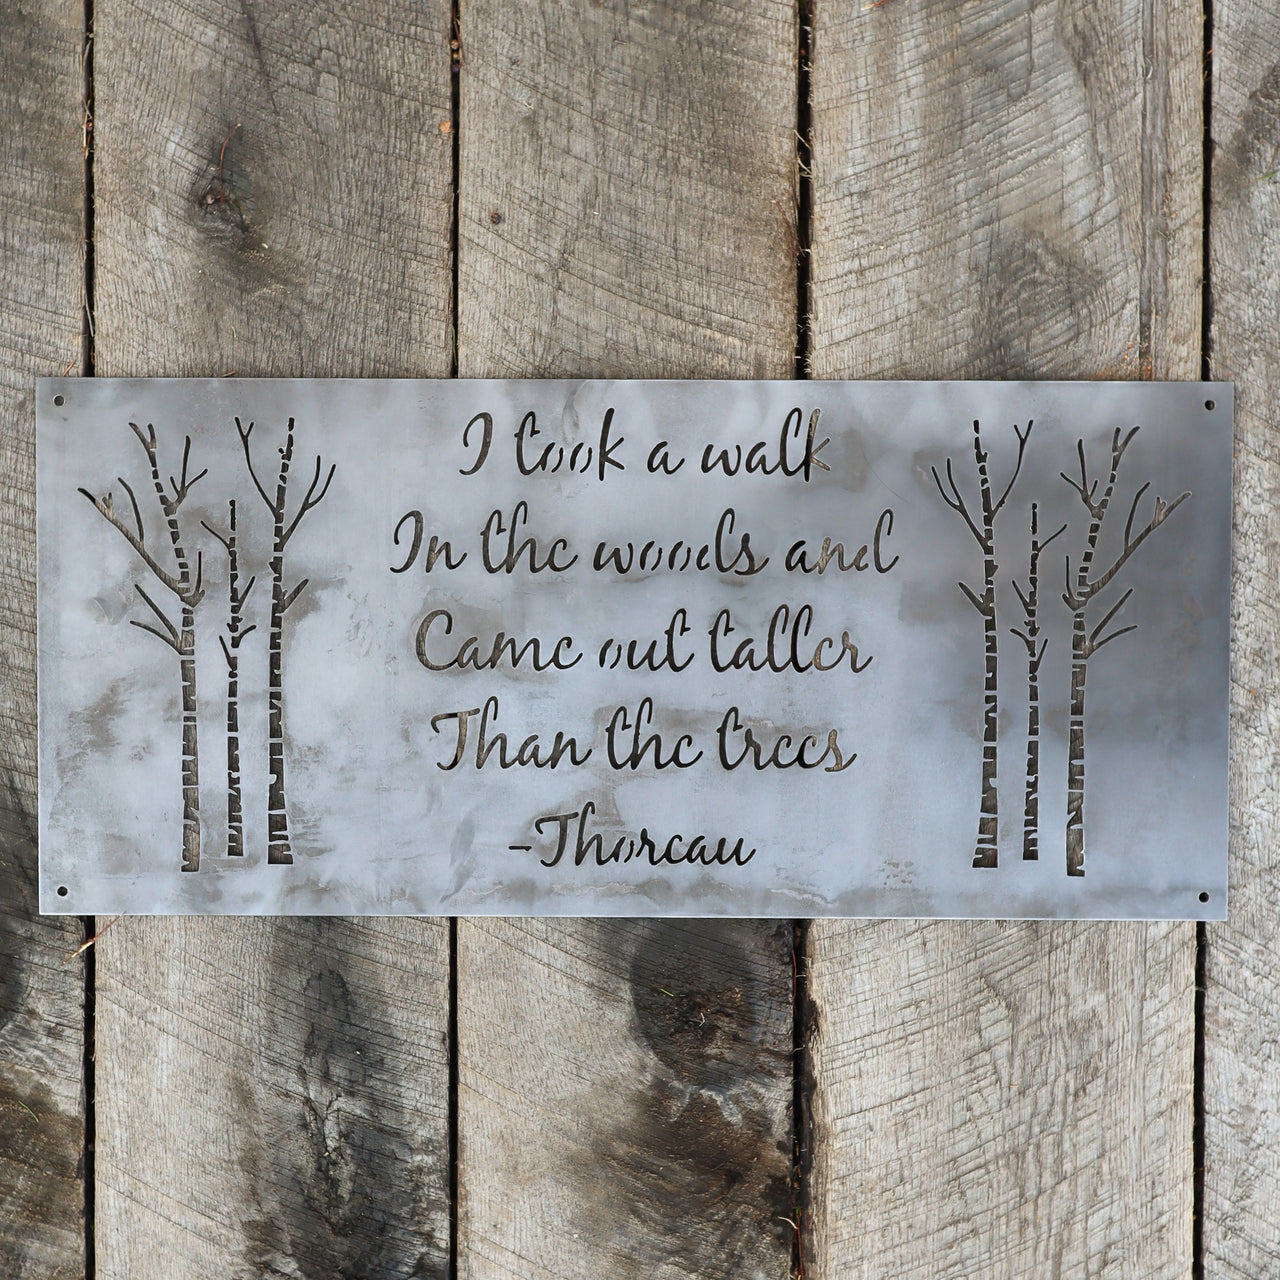 I Took a Walk in the Woods Metal Sign - Rustic Wilderness Cabin Decor - Henry David Thoreau Quote Wanderlust Wall Art